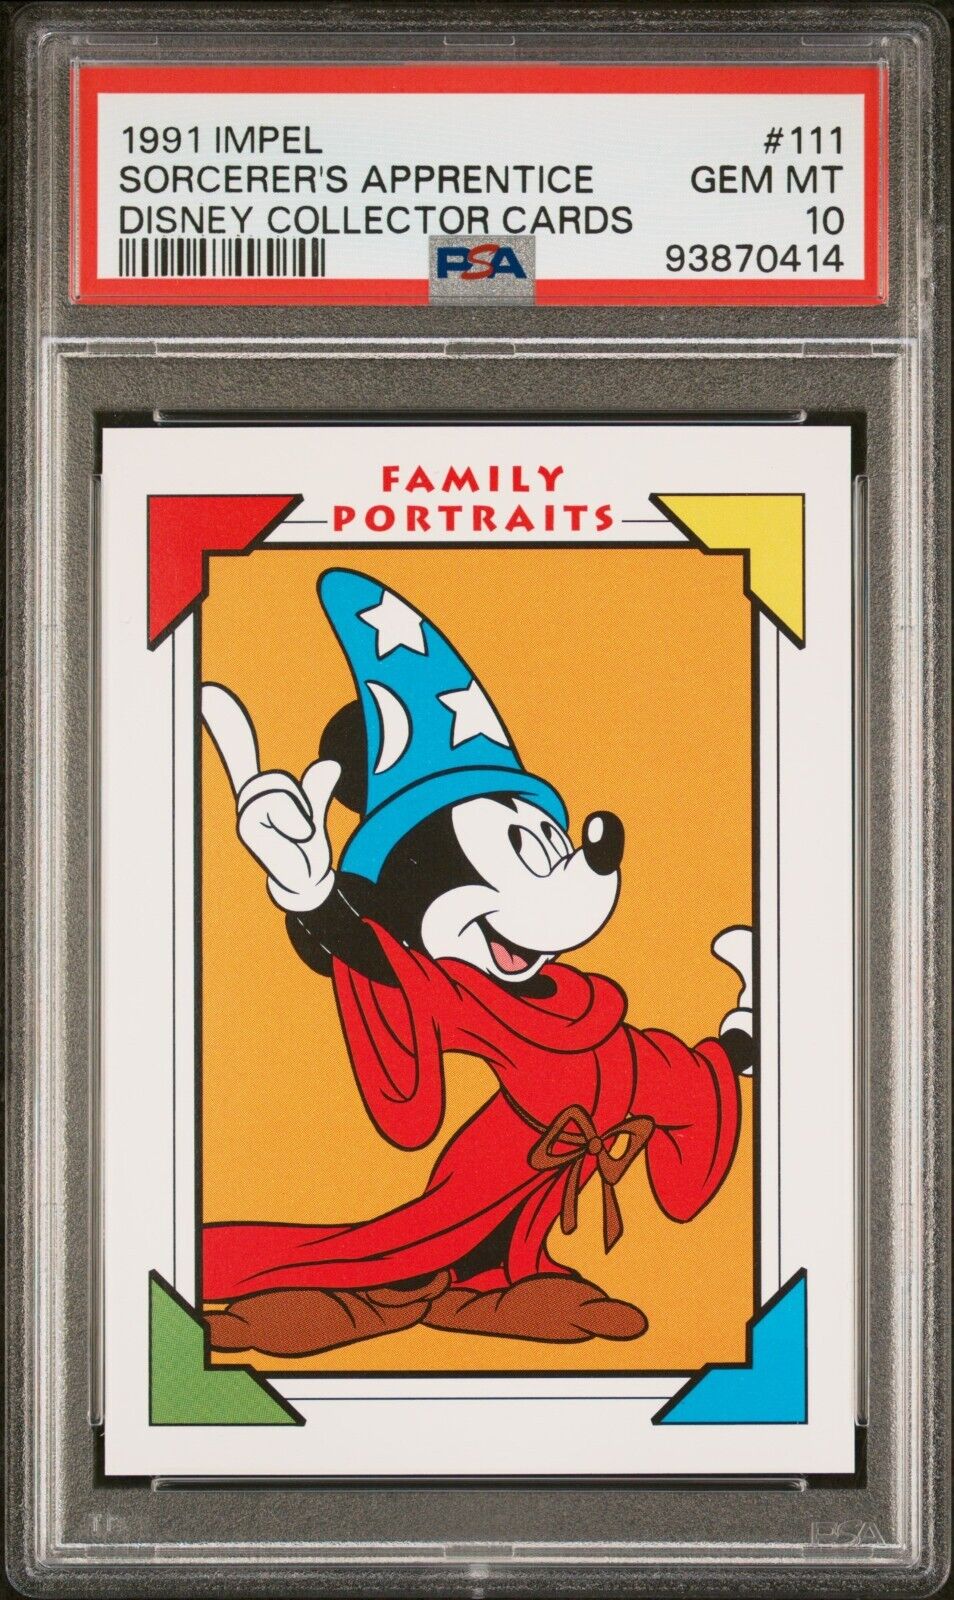 1991 Disney Collector Cards #111 Sorcerer's Apprentice Mickey Mouse PSA 10